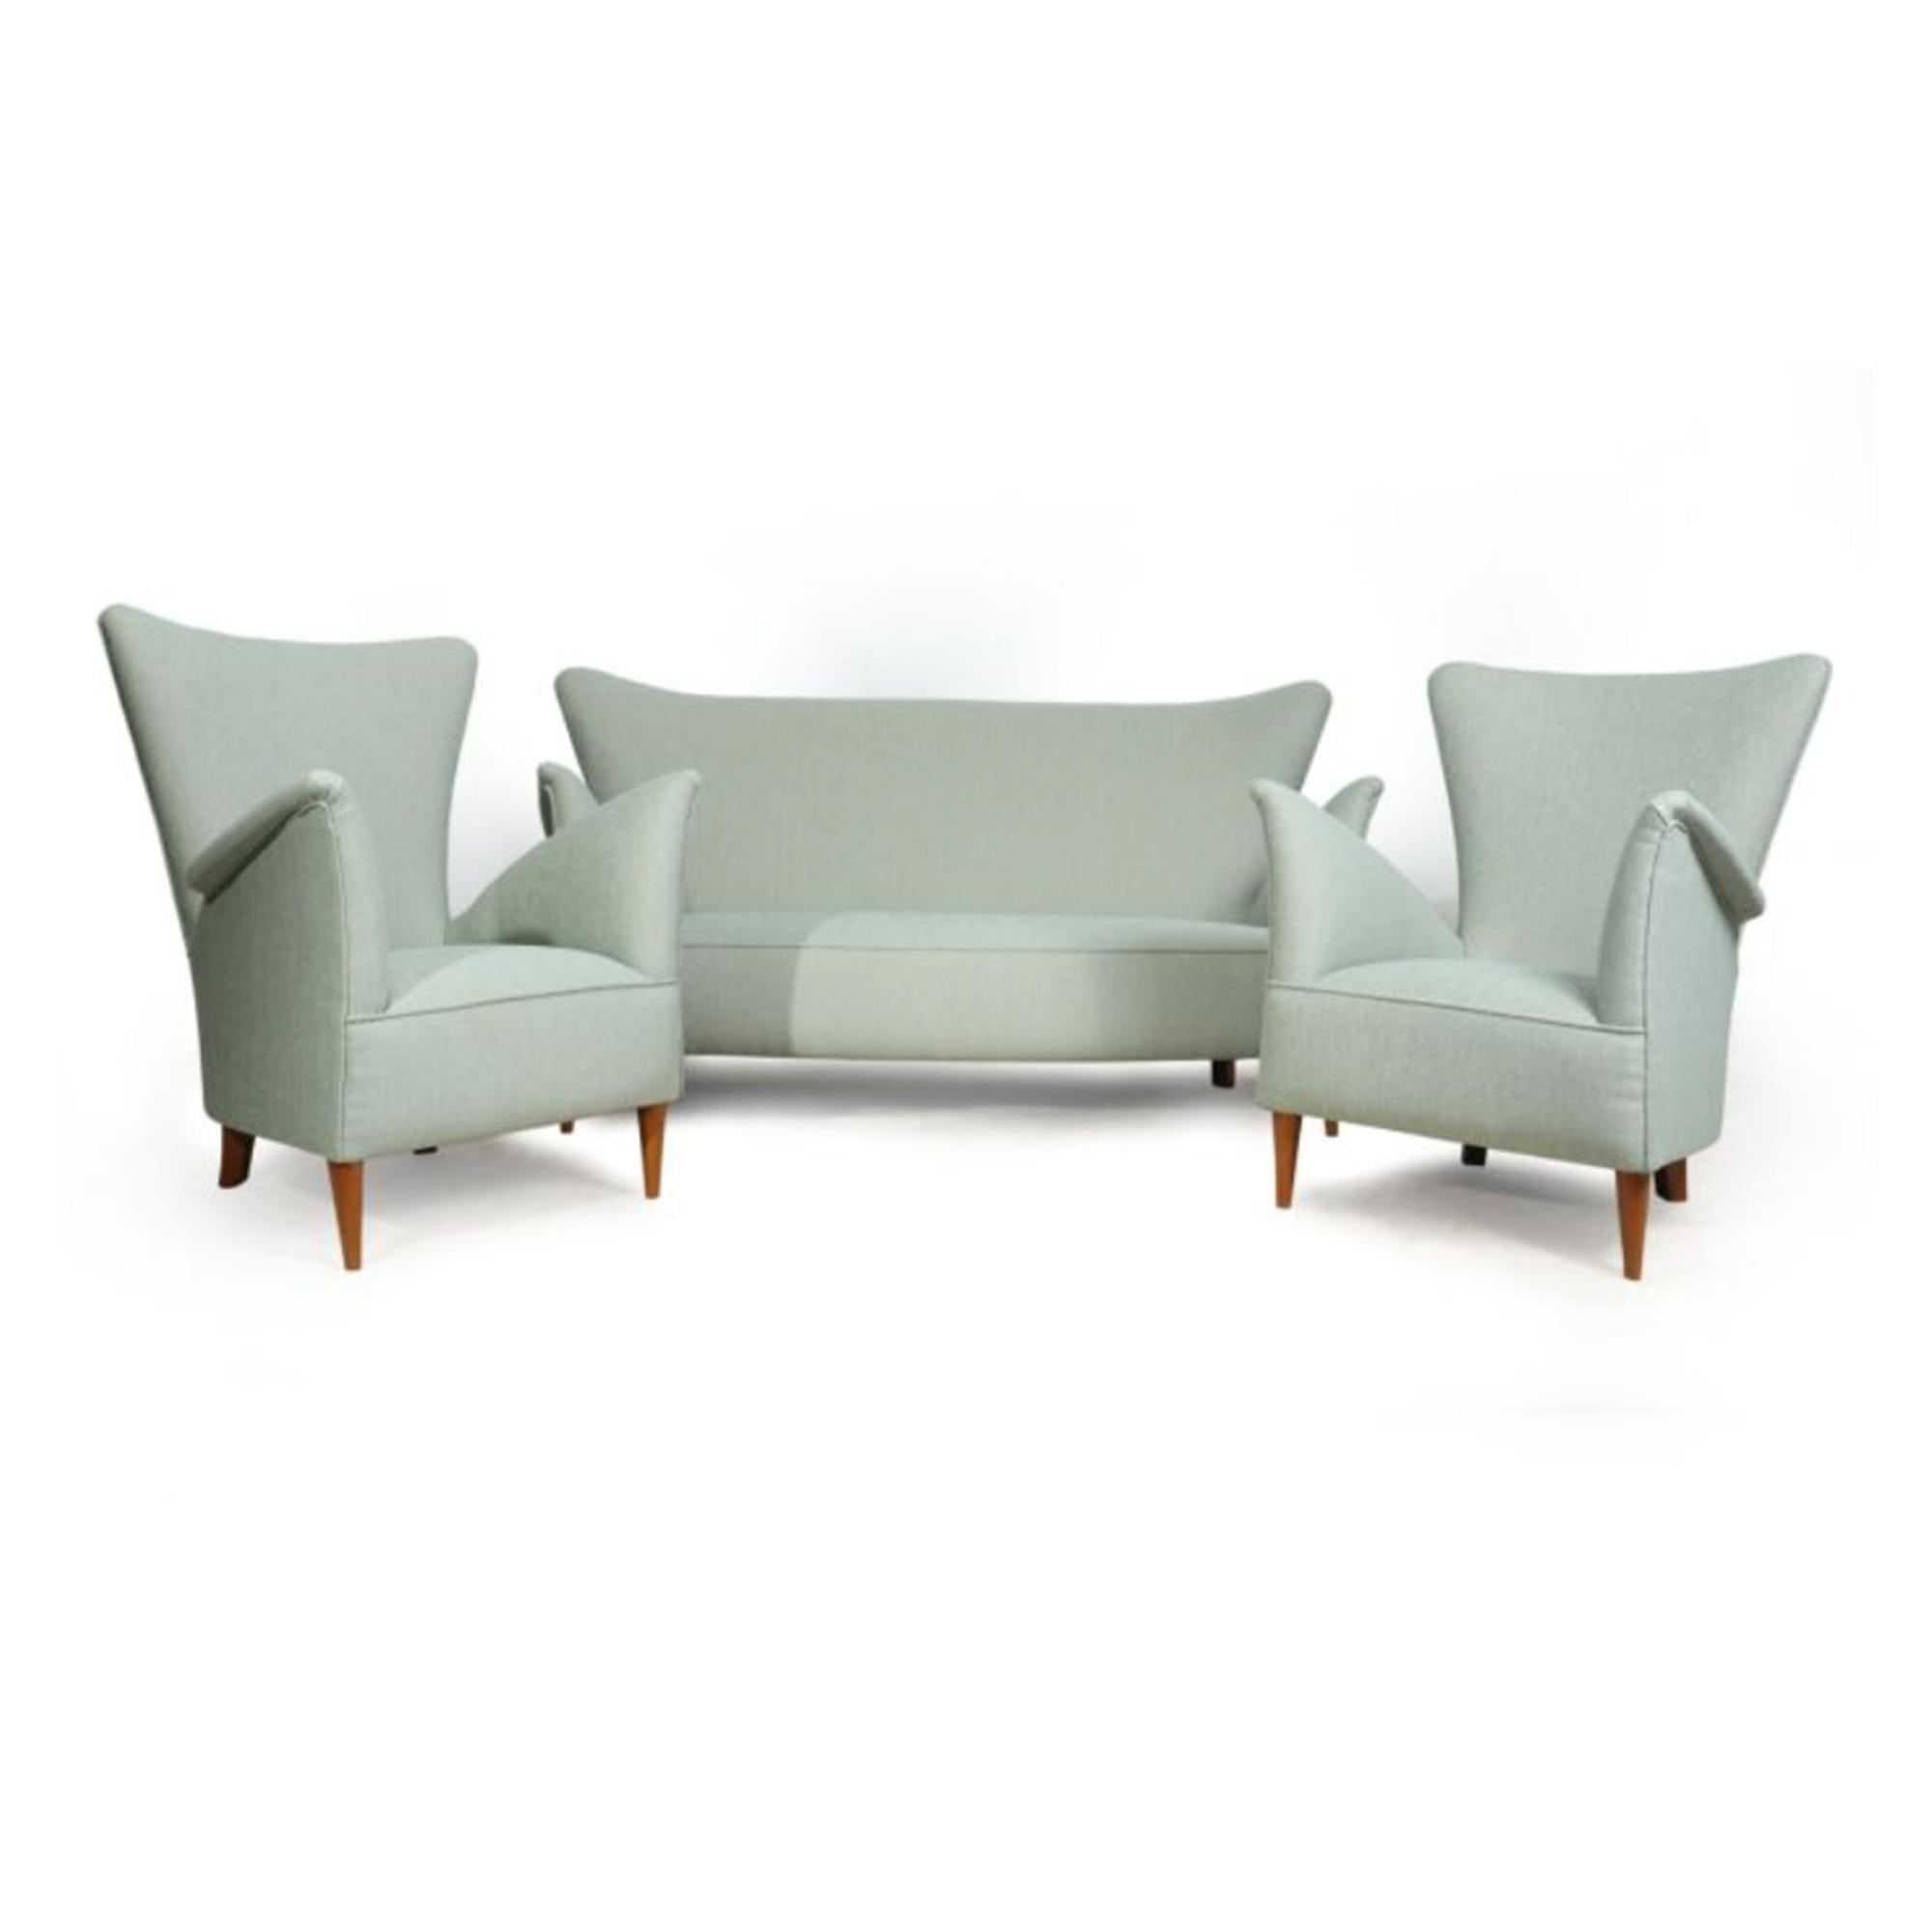 Armchairs and sofa by Gio Ponti for Hotel Bristol Merano c1954

A Pair of armchairs and a sofa designed by Gio Ponti for the Hotel Bristol in 1954, this set has been fully upholstered, covered in thick mint and silver colour geometric fabric and